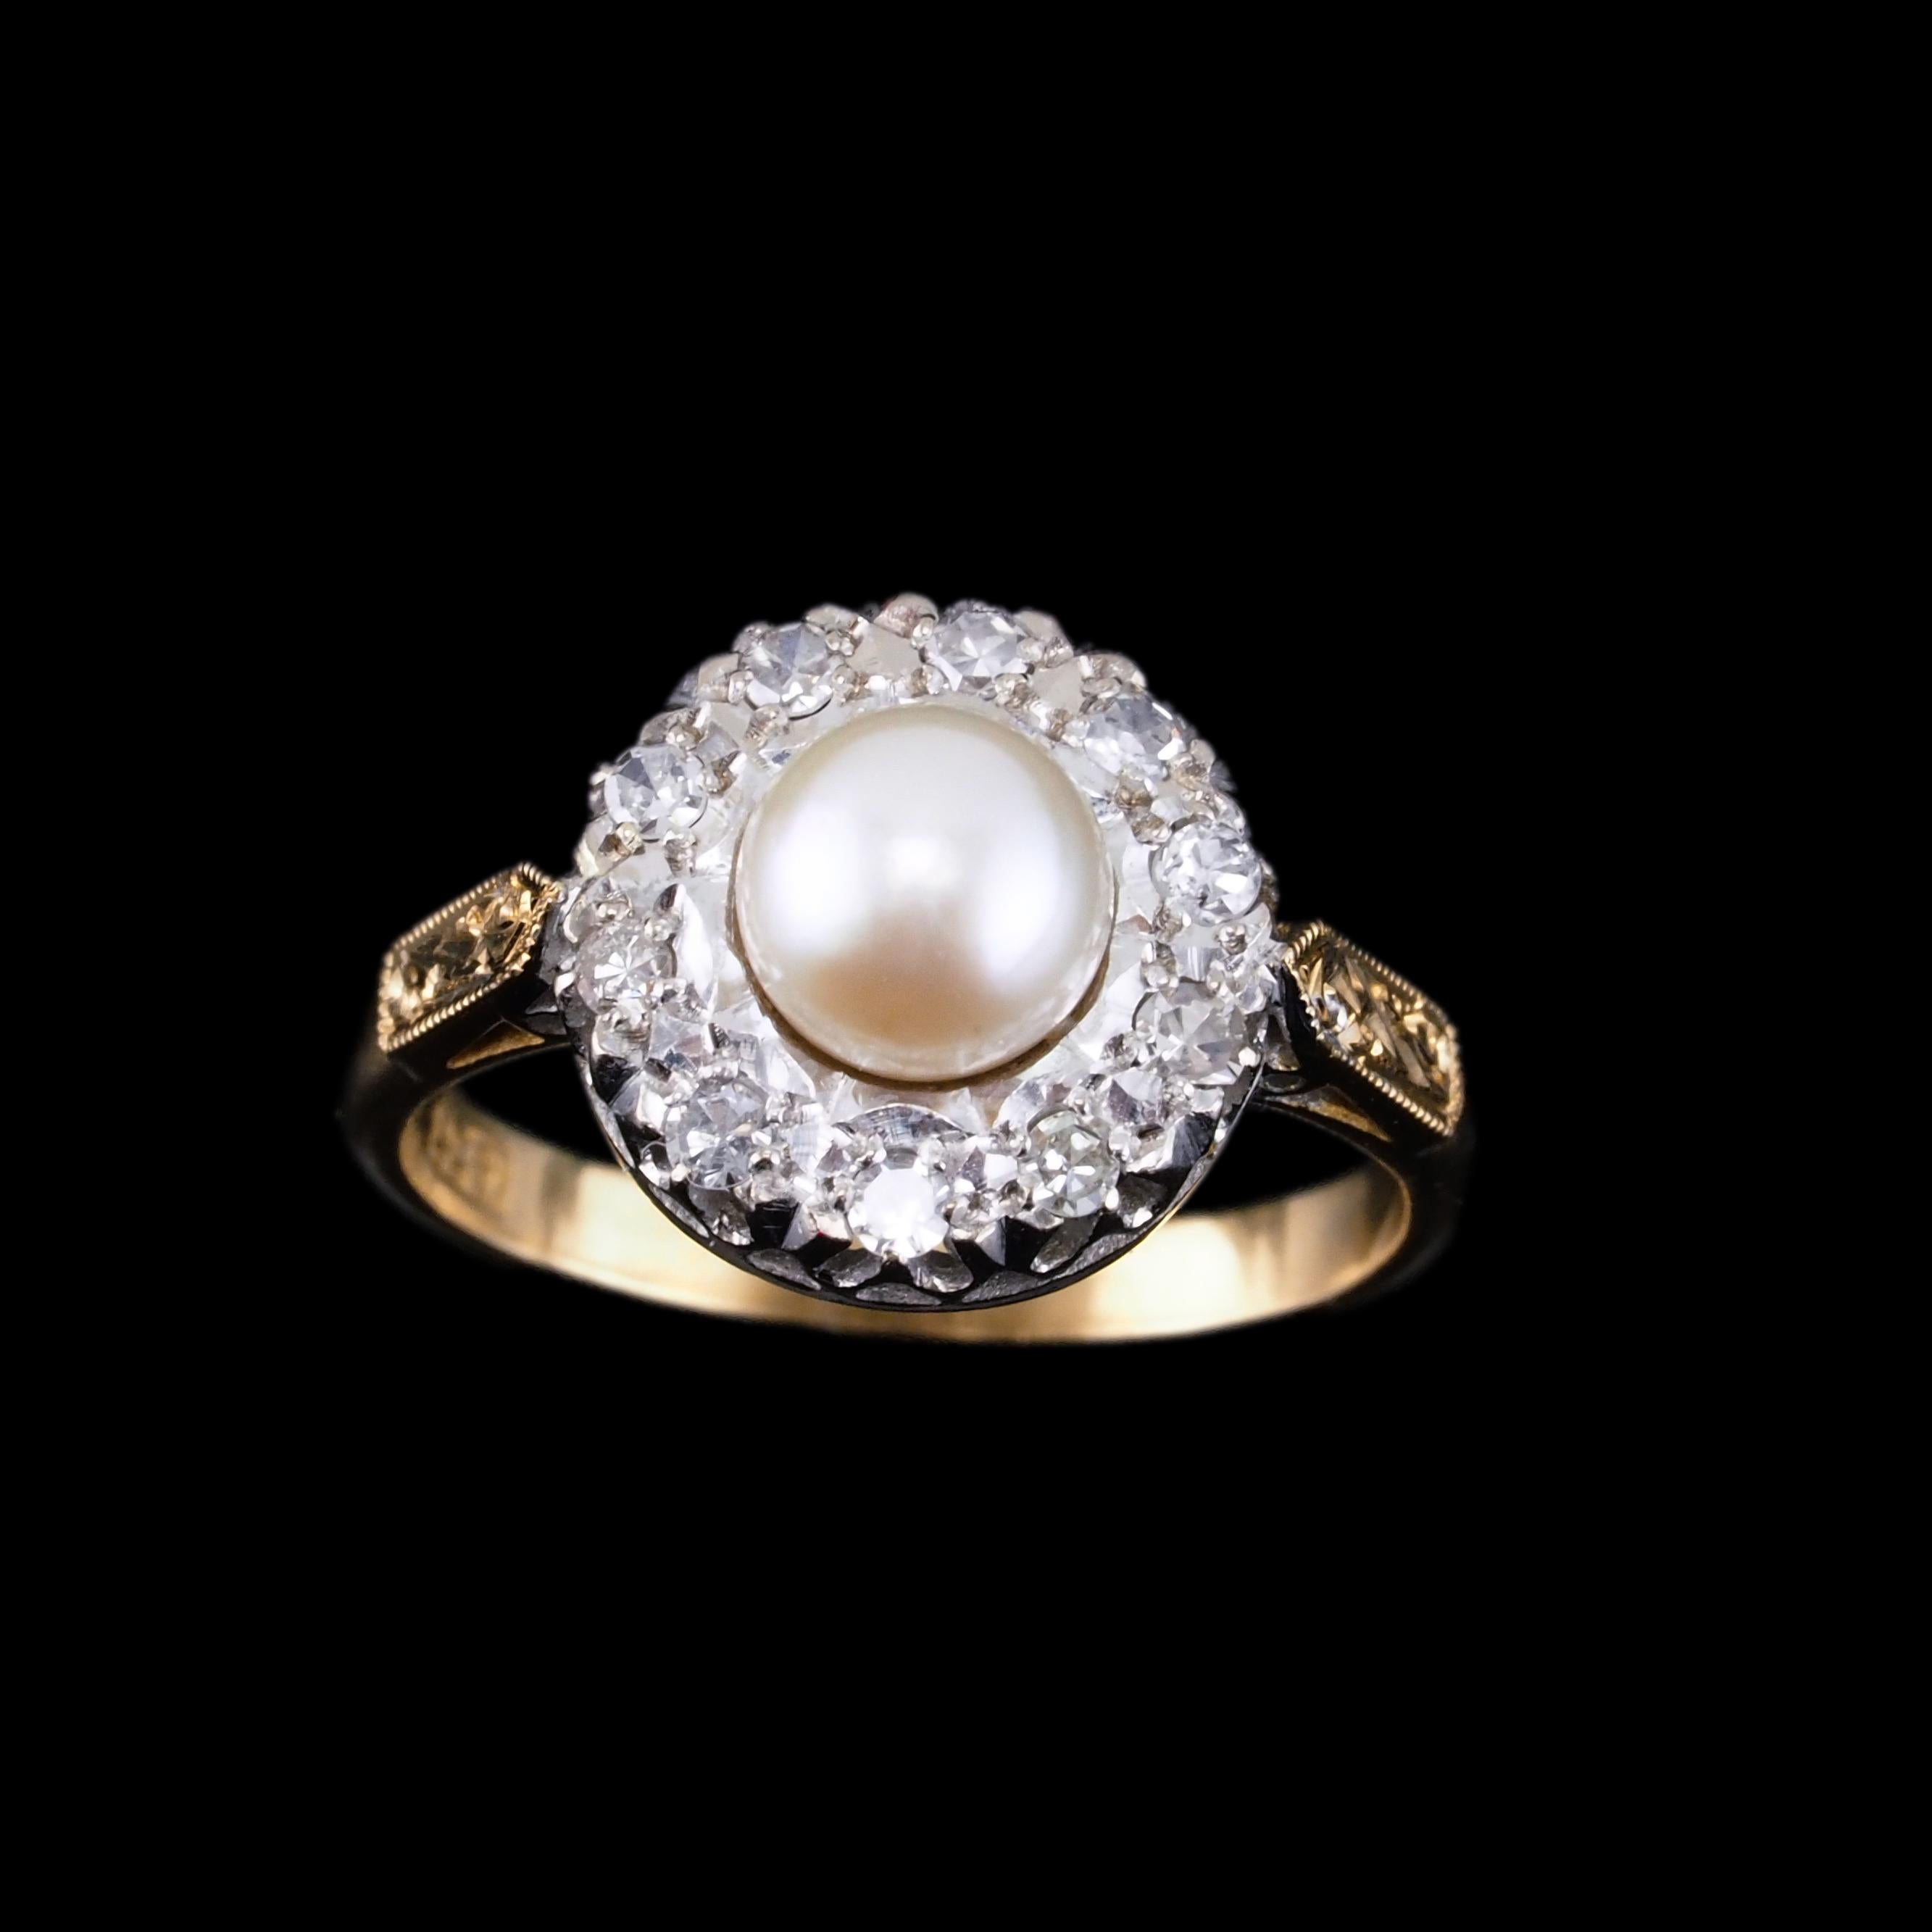 Welcome to Artisan Antiques based in Mayfair, London - We are delighted to offer this stunning antique pearl and diamond 18ct gold cluster ring made c.1900s. 

Price negotiations may be possible under certain criteria, please contact us or search